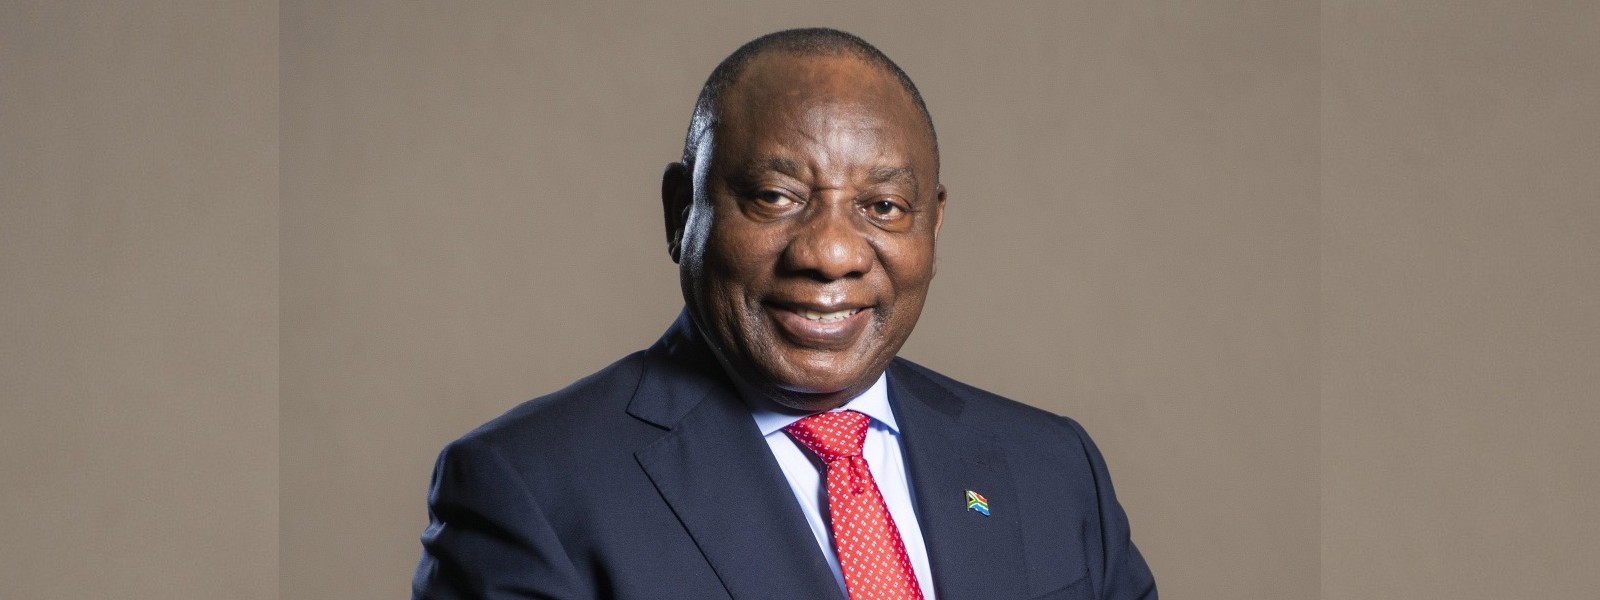 Report finds South Africa’s Ramaphosa violated oath of office